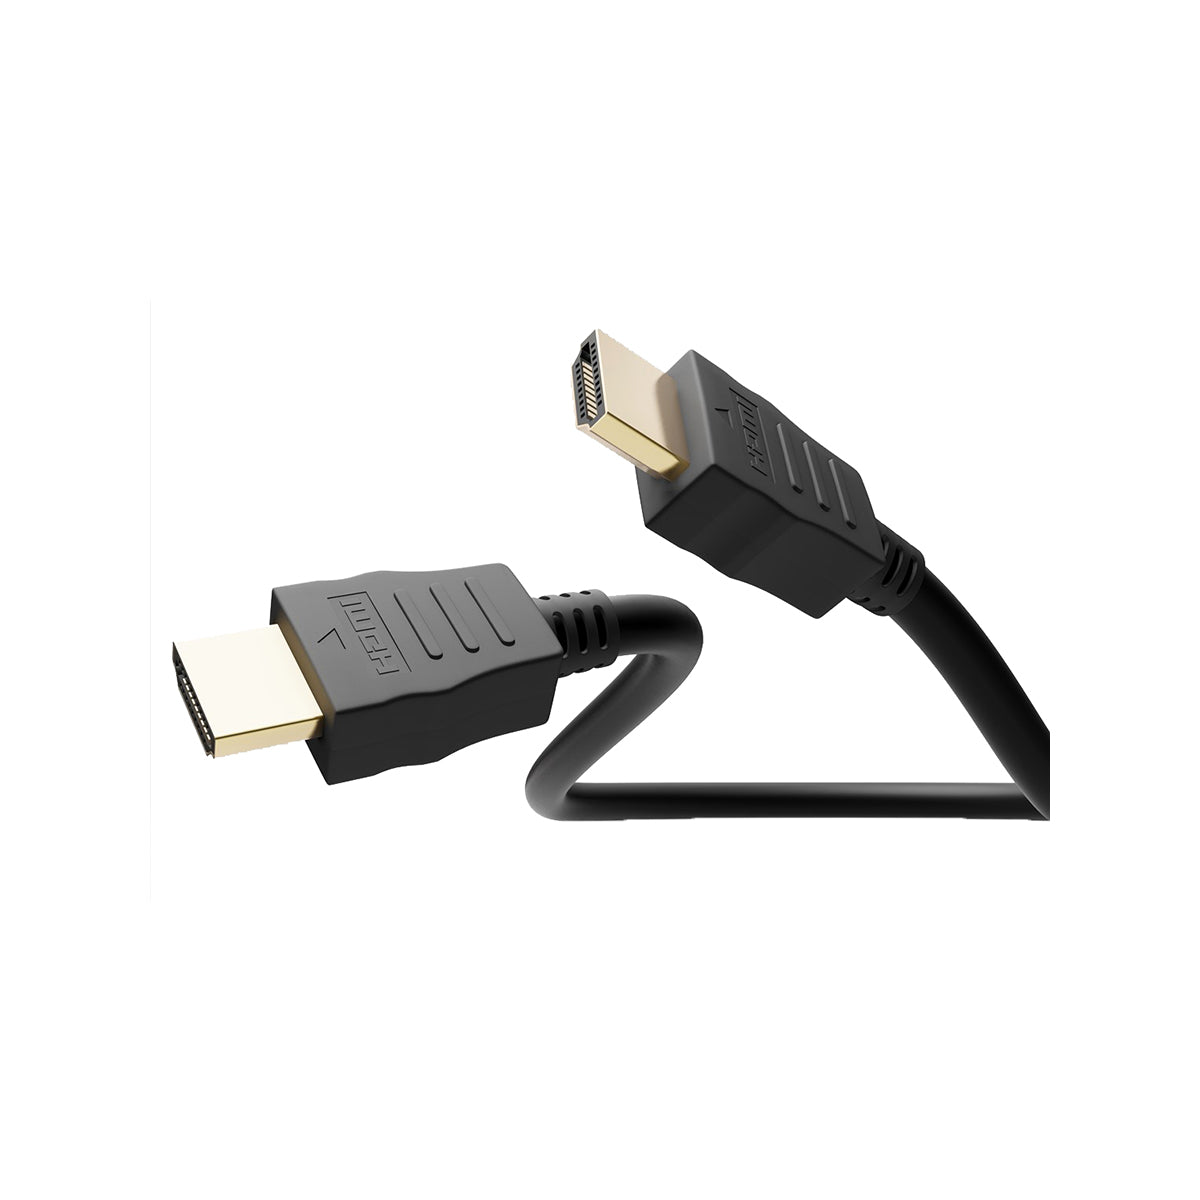 Goobay High Speed HDMI™ Cable with Ethernet (4K@60Hz) 15M for Laptops